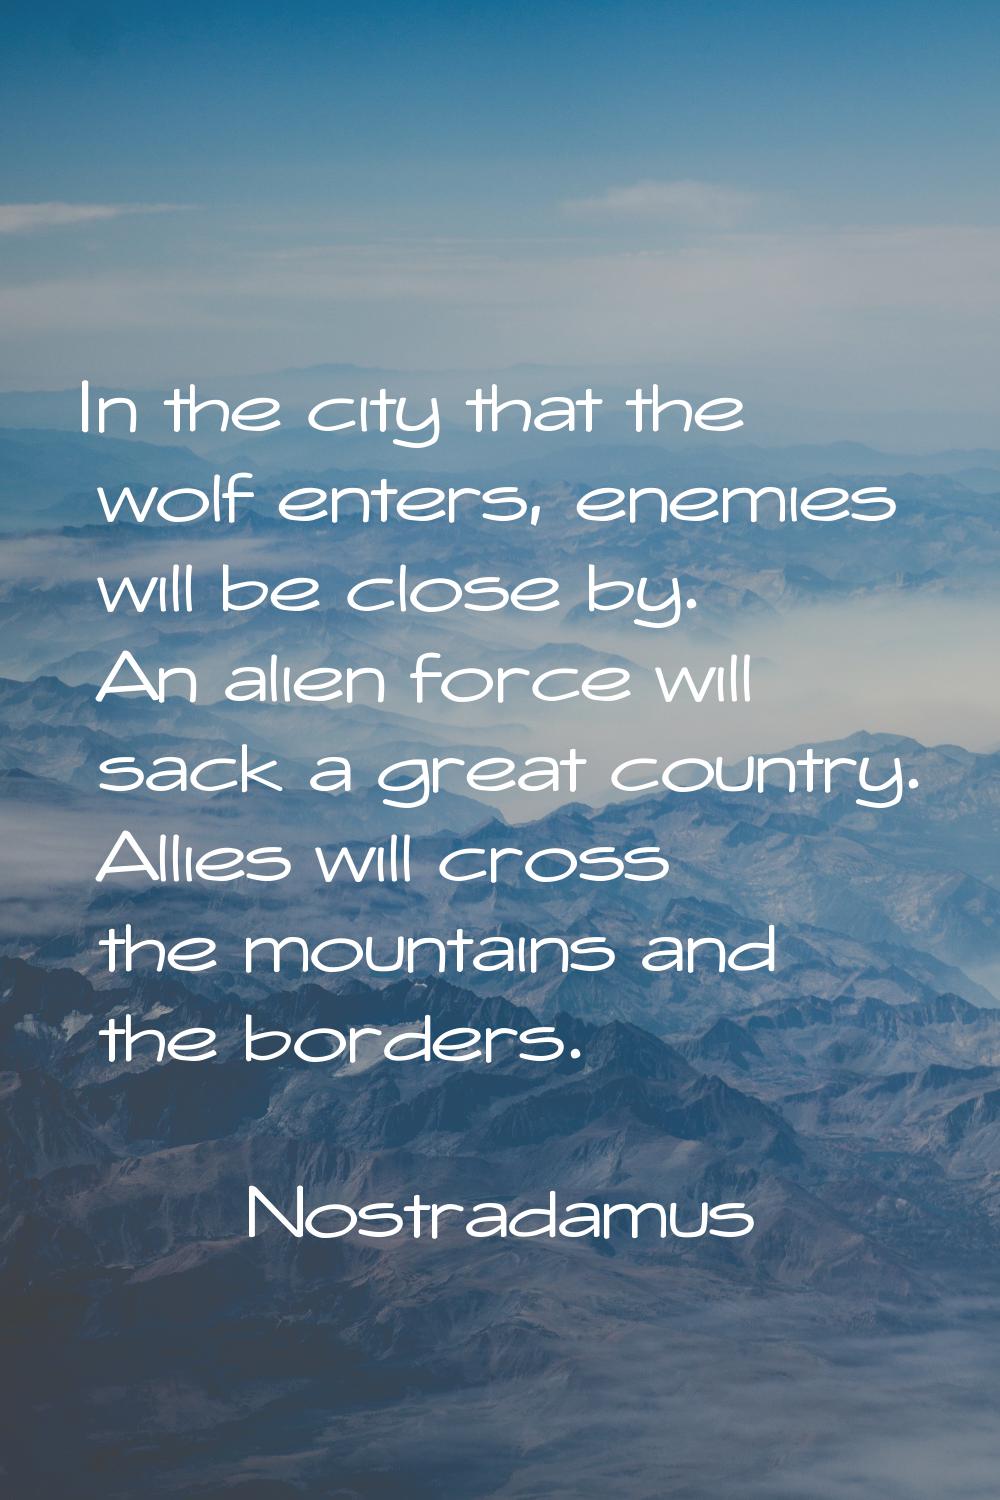 In the city that the wolf enters, enemies will be close by. An alien force will sack a great countr